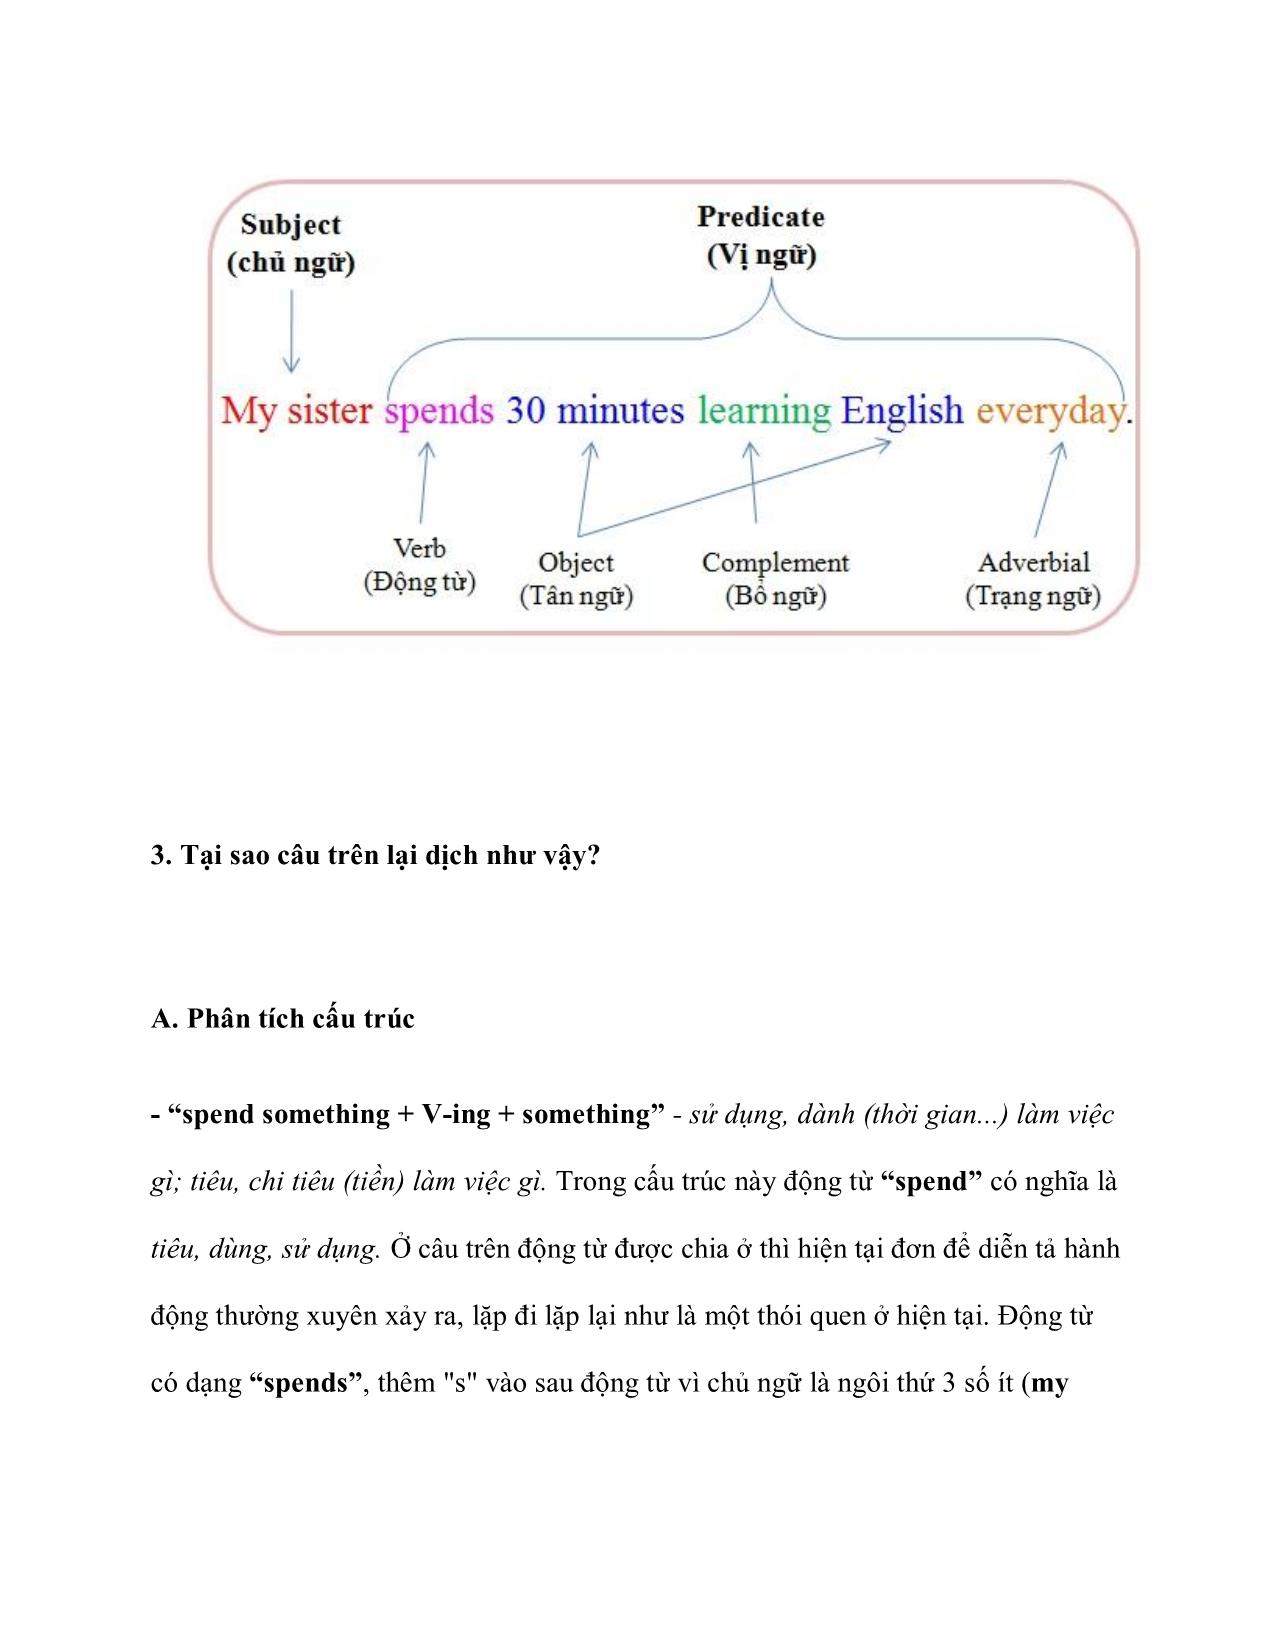 My sister spends 30 minutes learning English everyday trang 4